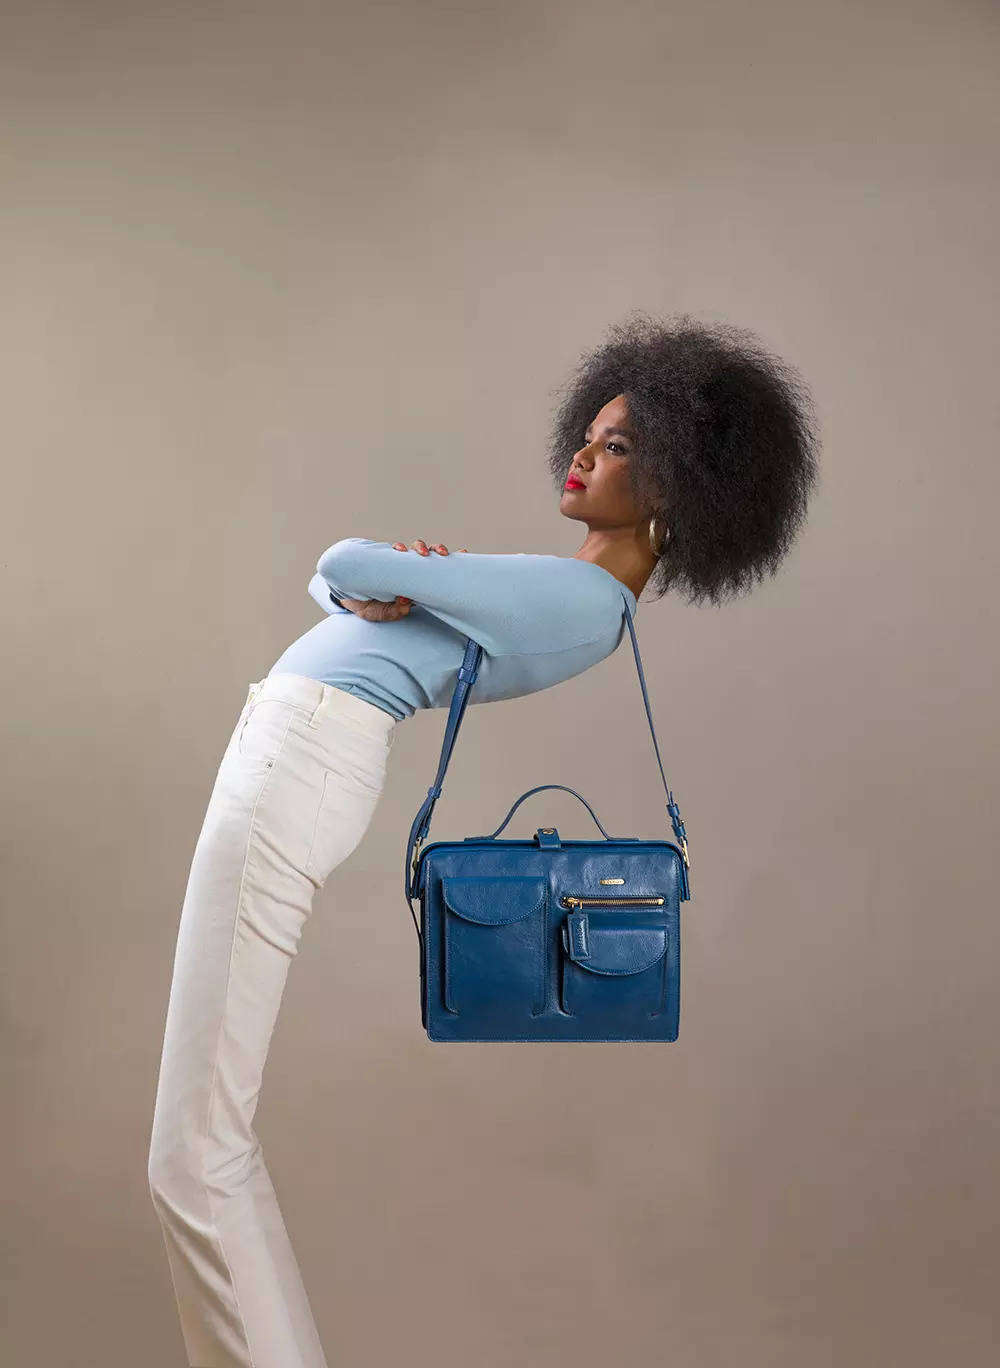 Hidesign to unveil luxury bag and wallet collection in two months